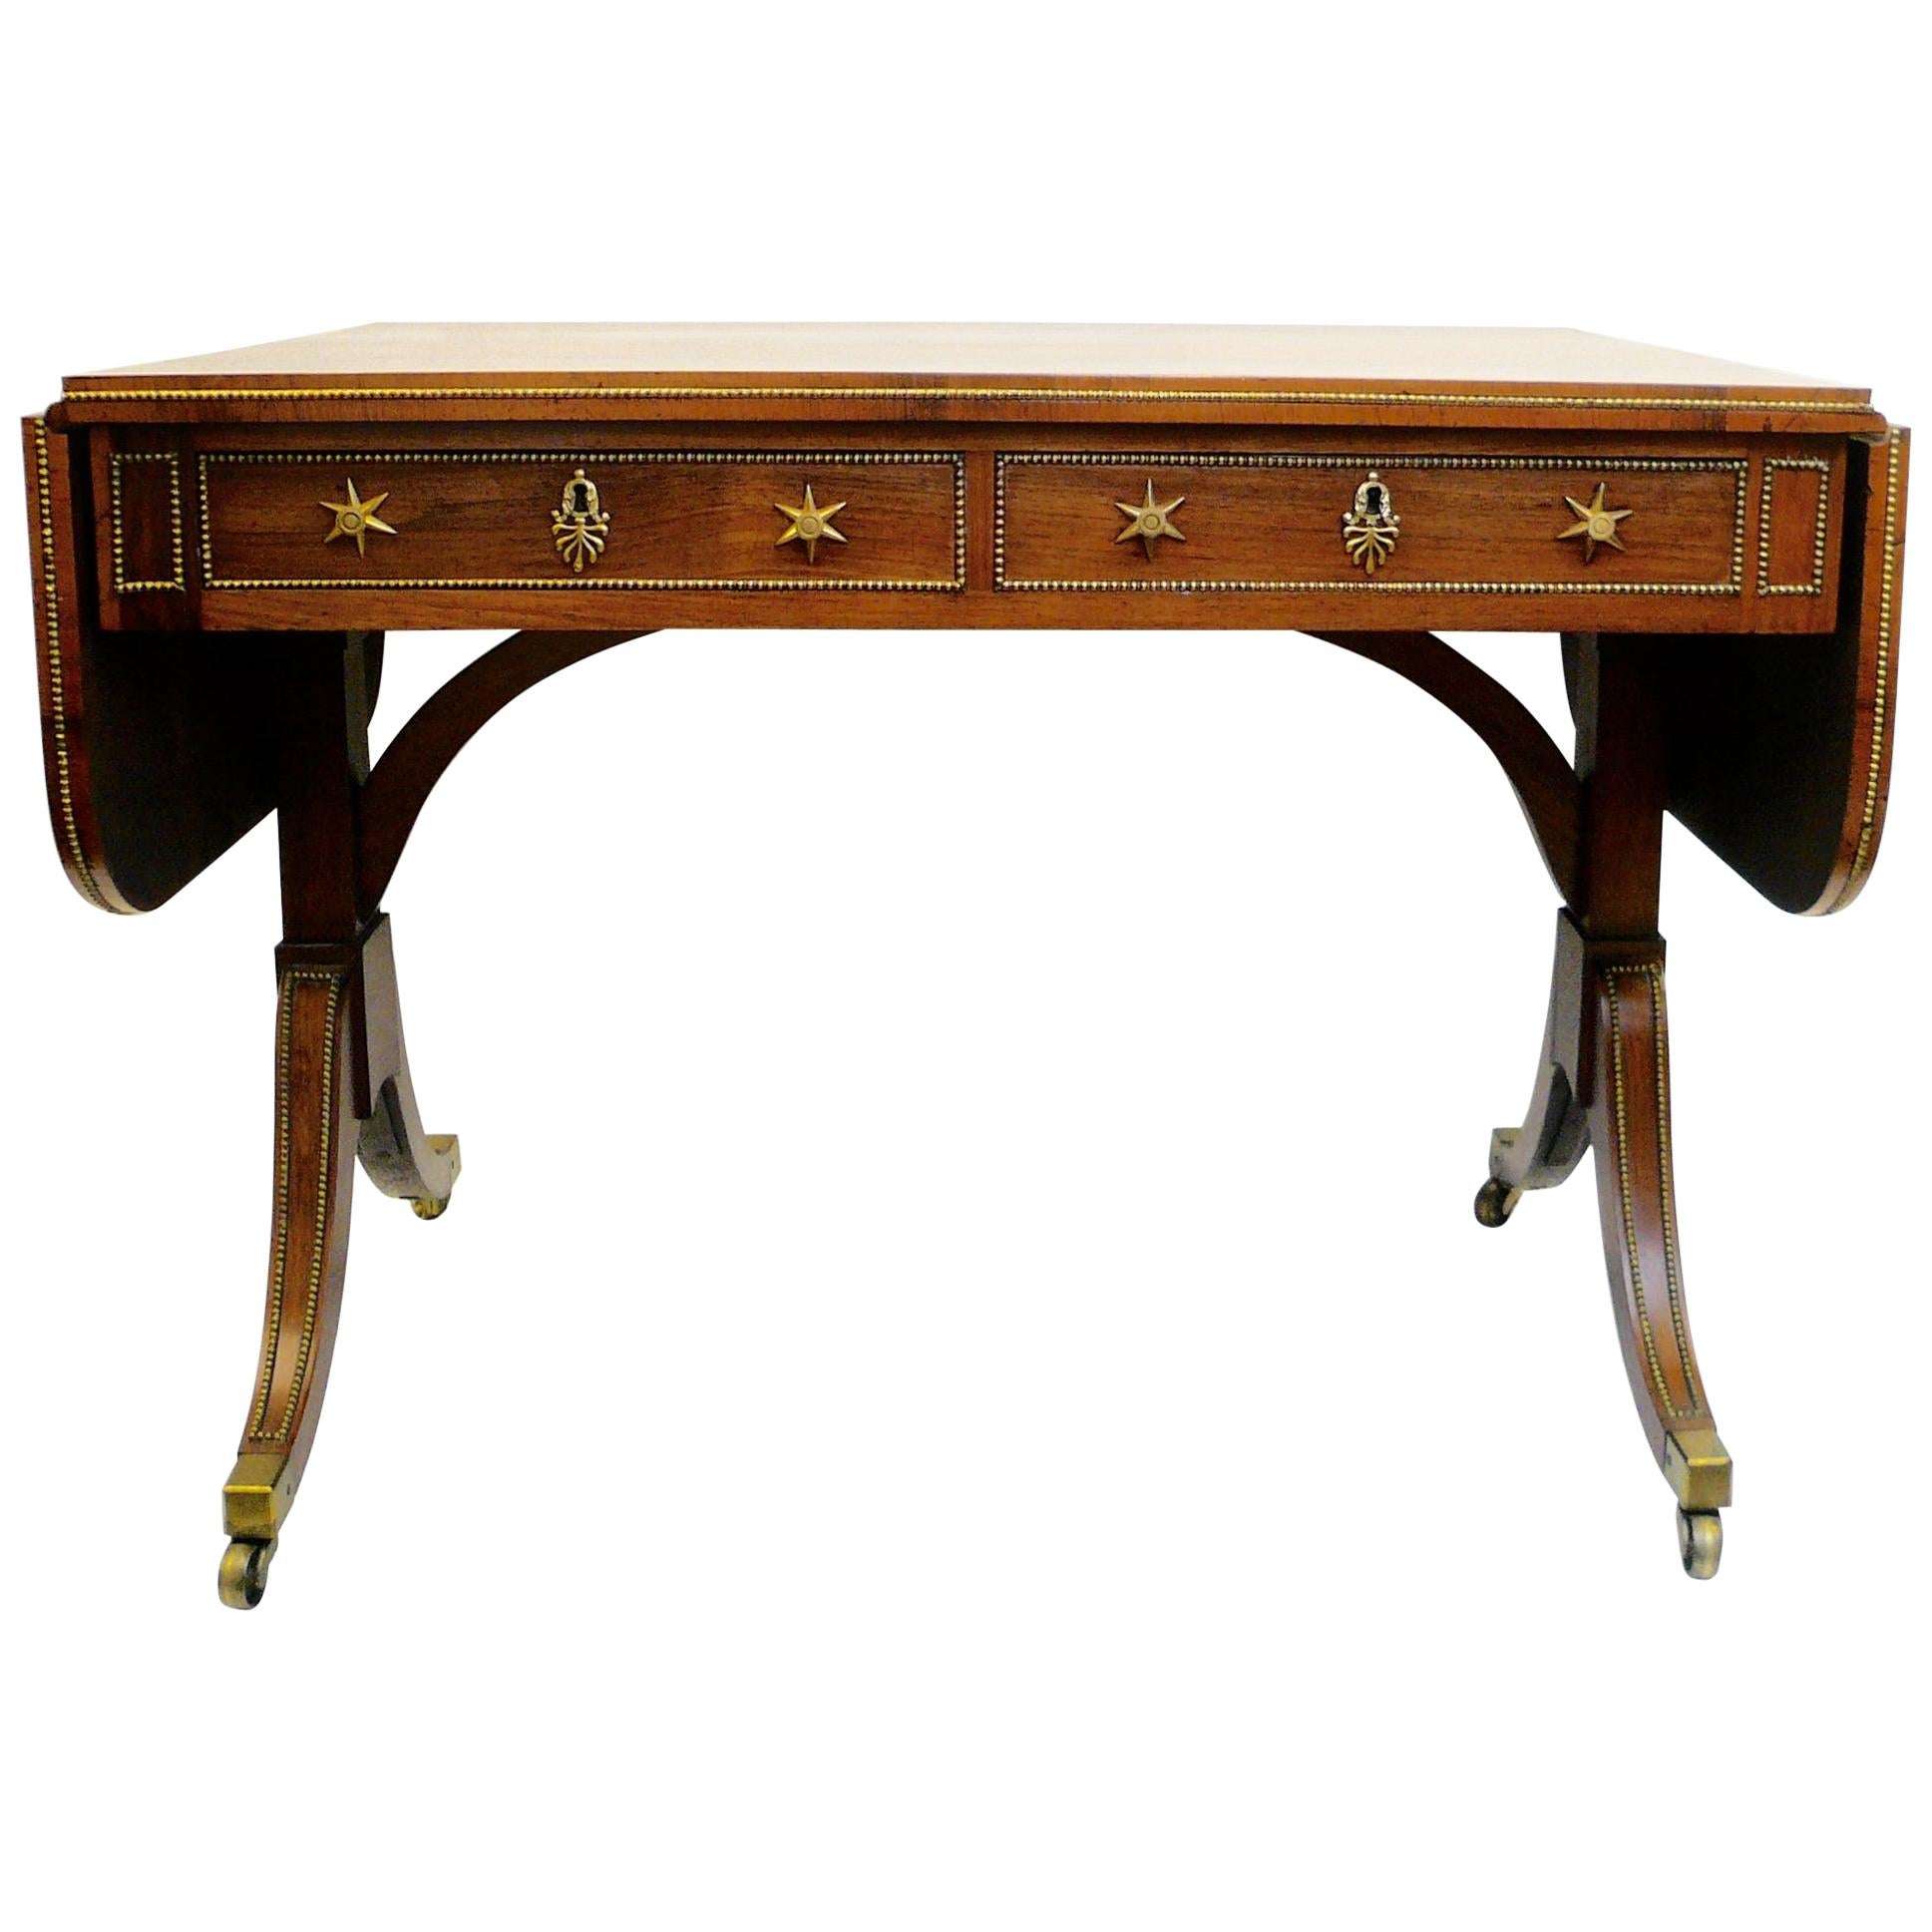 English Rosewood Sofa Table, Attributed to Gillows of Lancaster, circa 1800